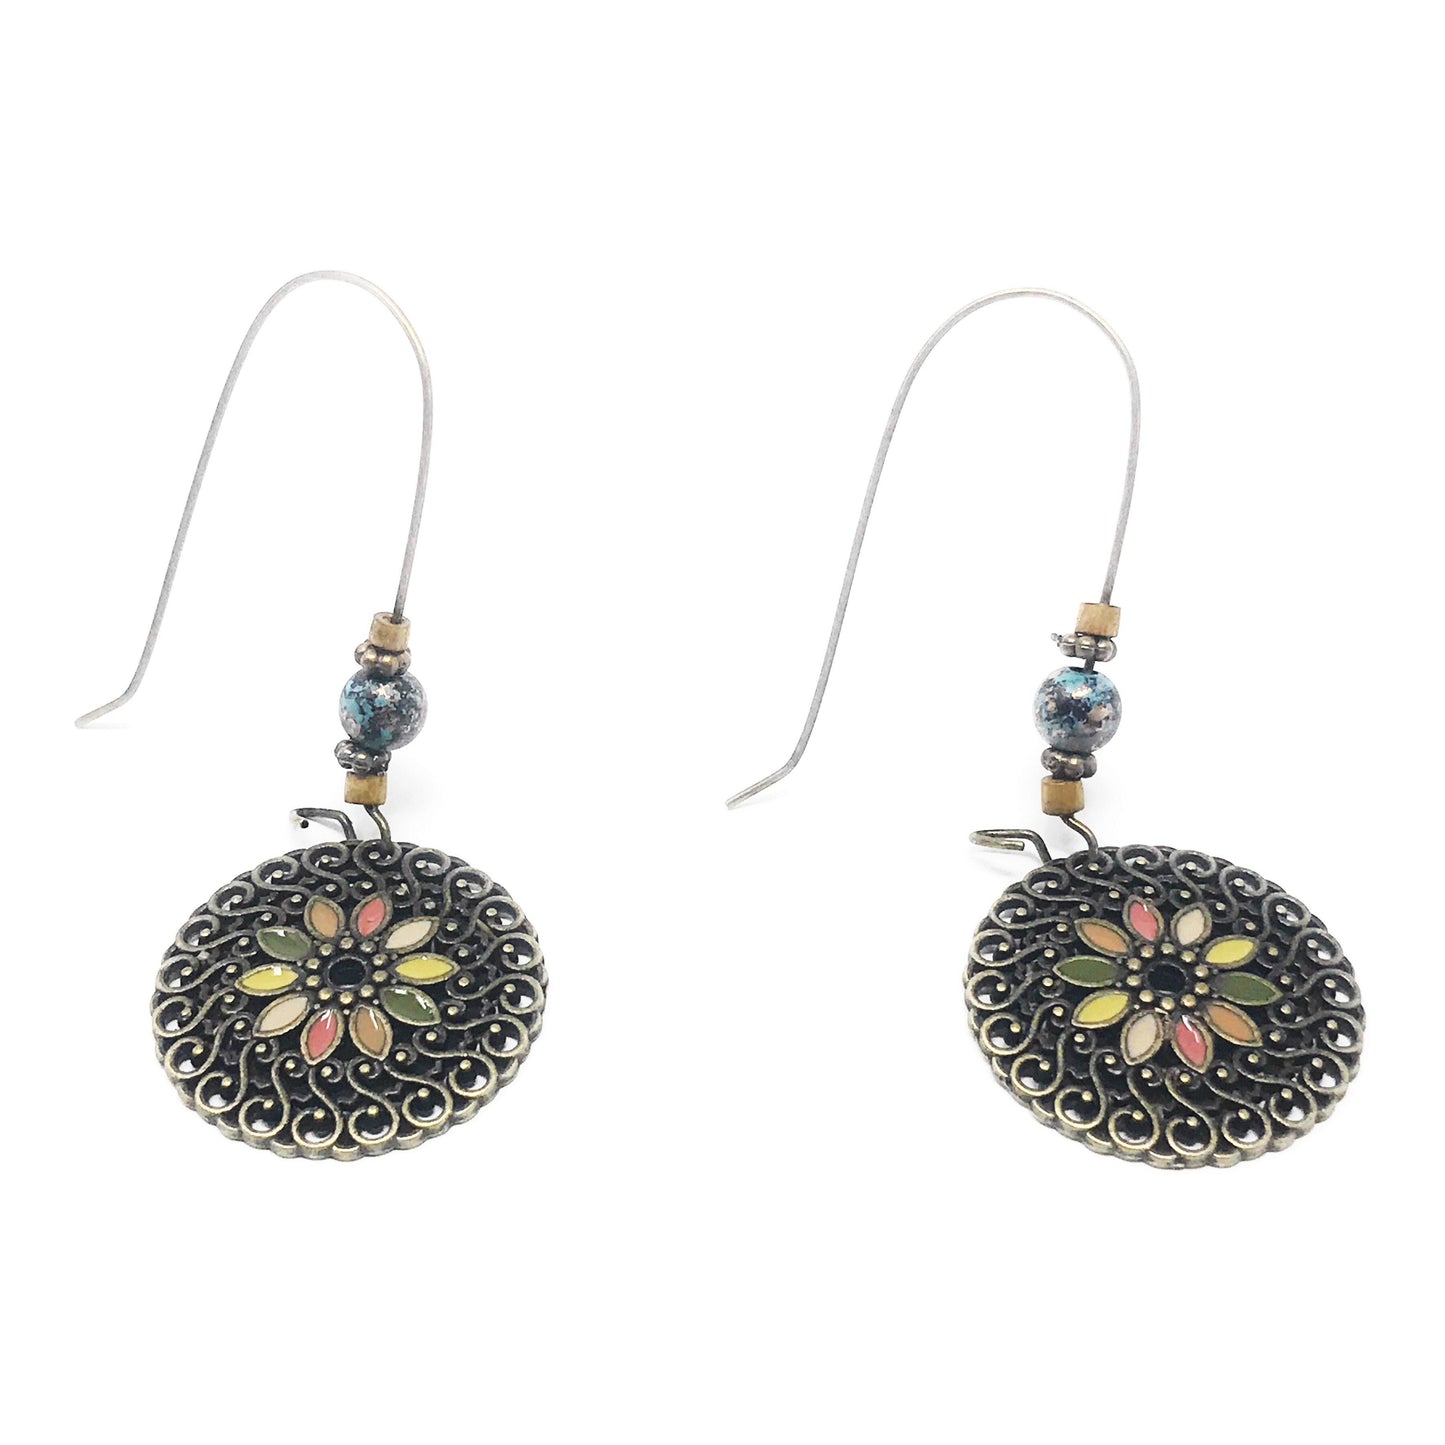 Round Boho Floral Dangle Earrings - Stylish Chic Accessories with a Bohemian Flair